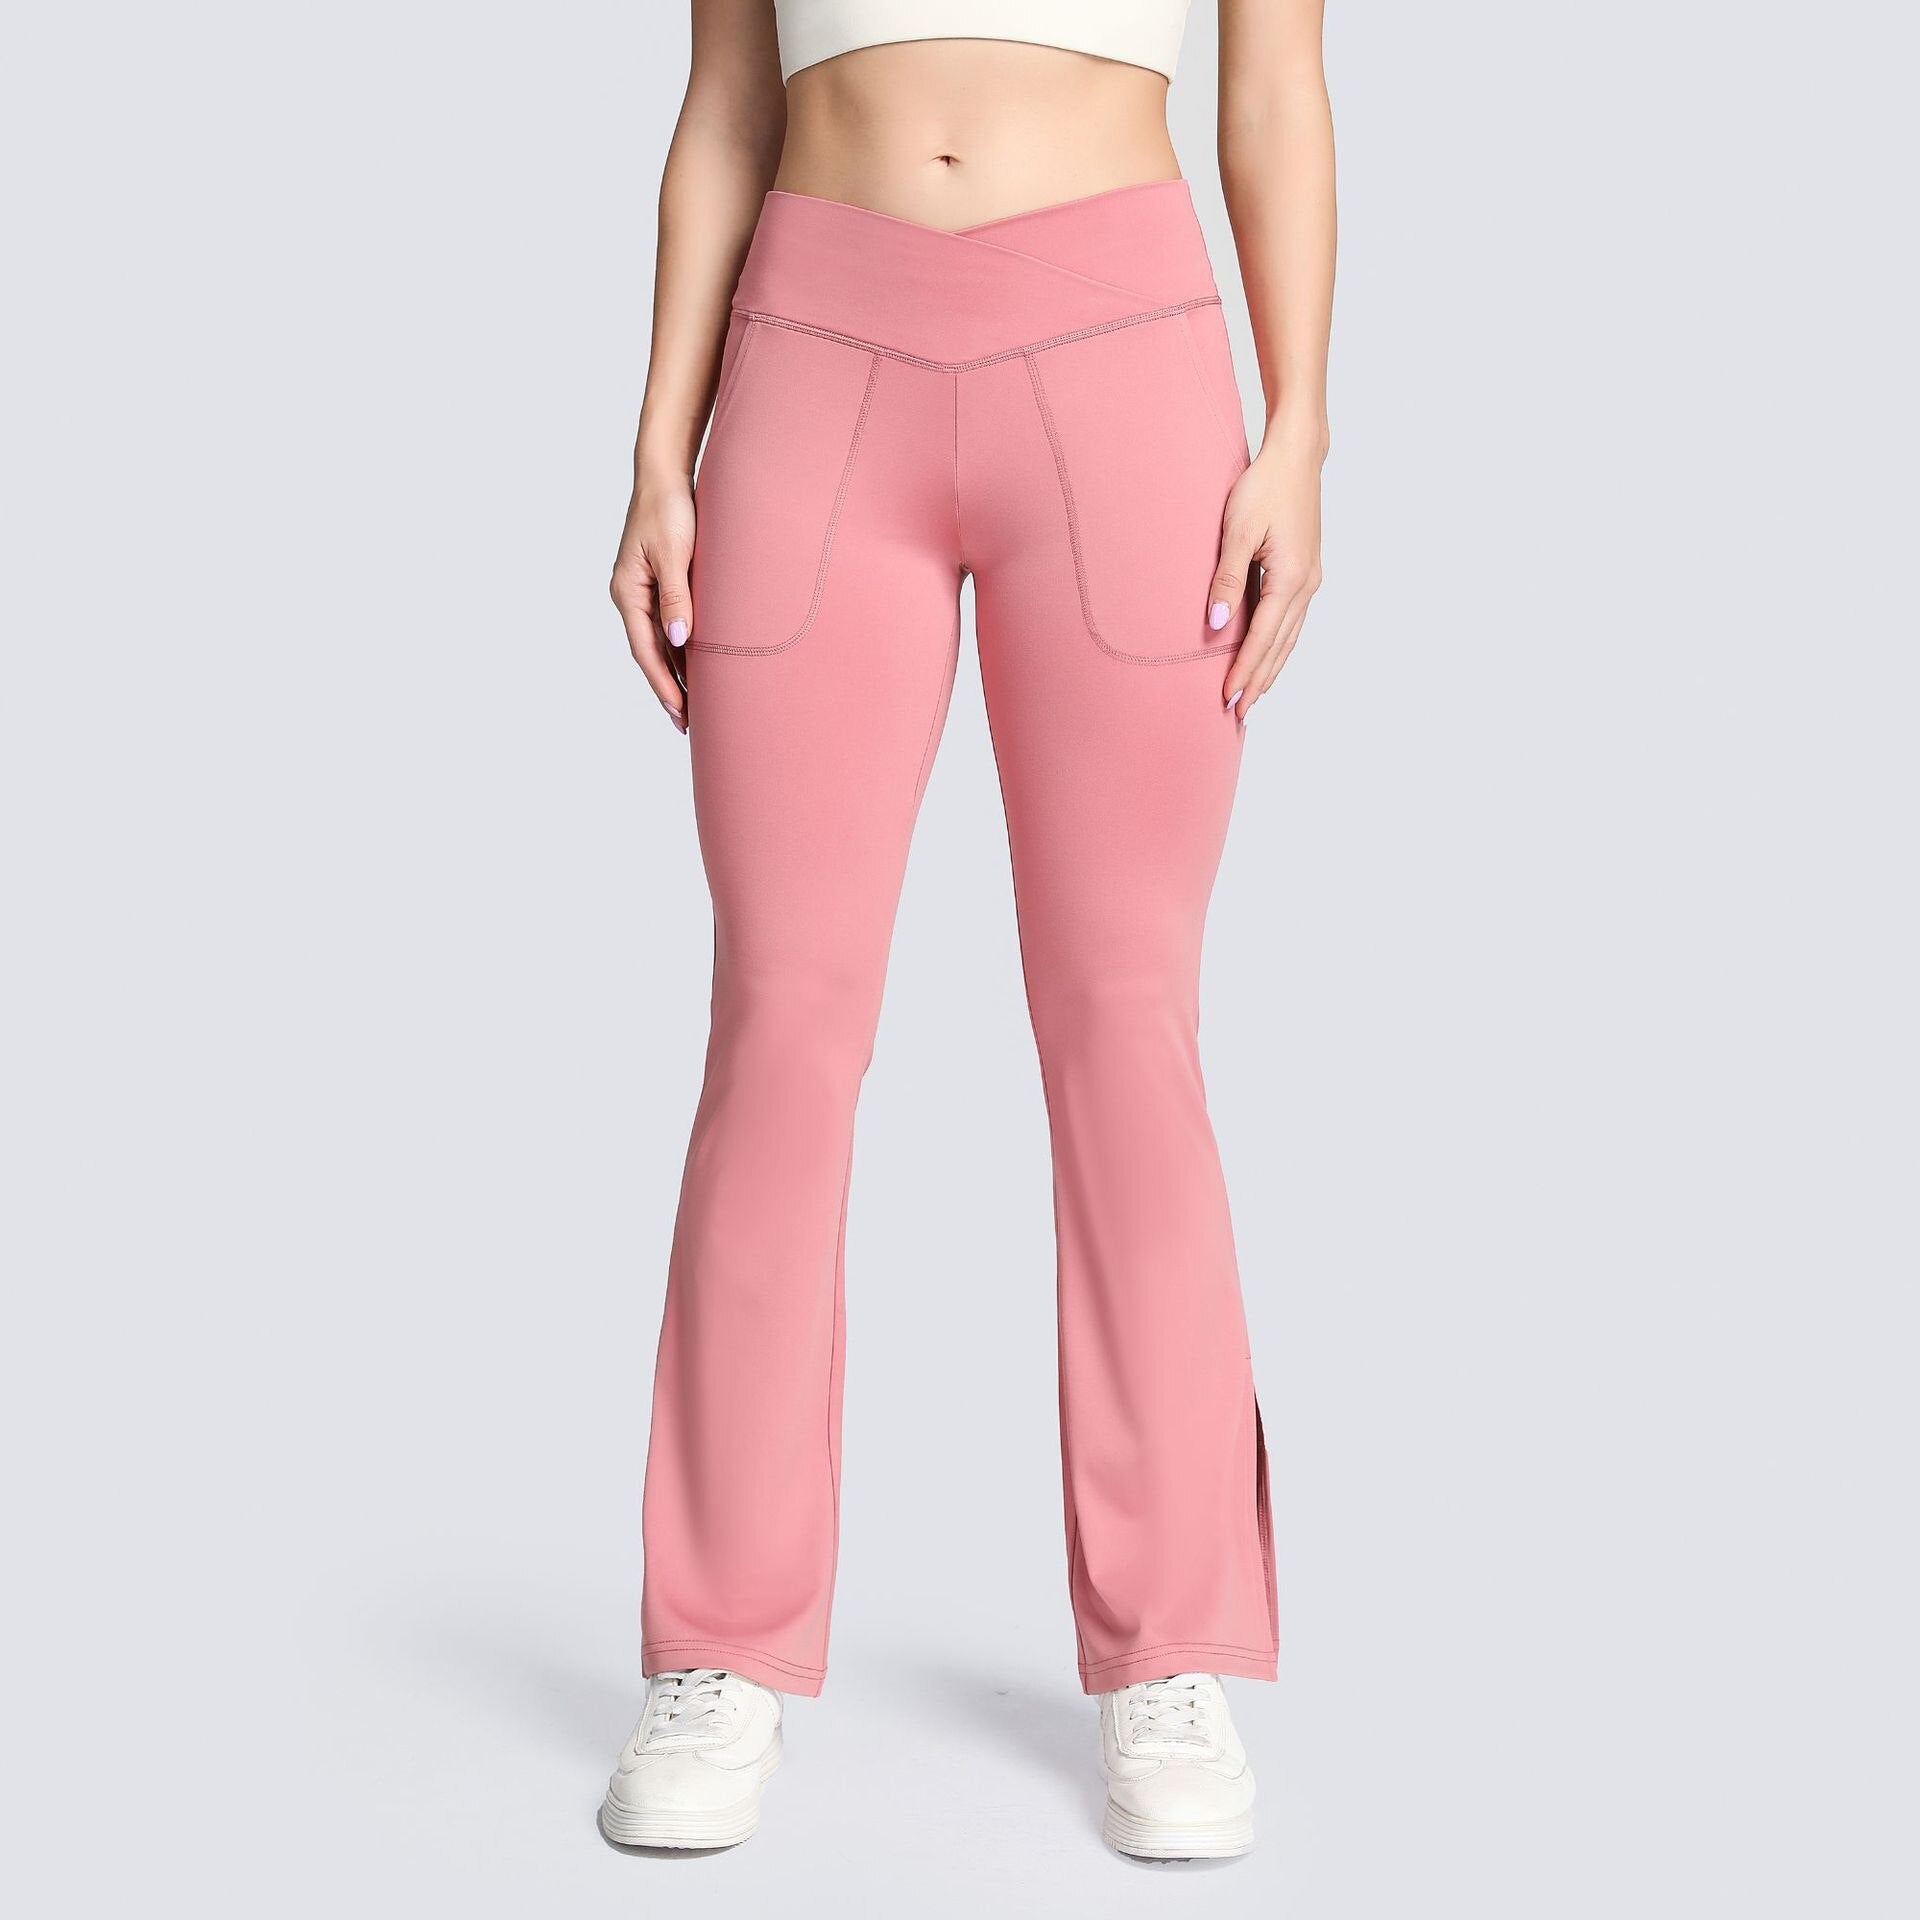 High Waist Crossover Flare Yoga Leggings with Pocket – Uncia Active